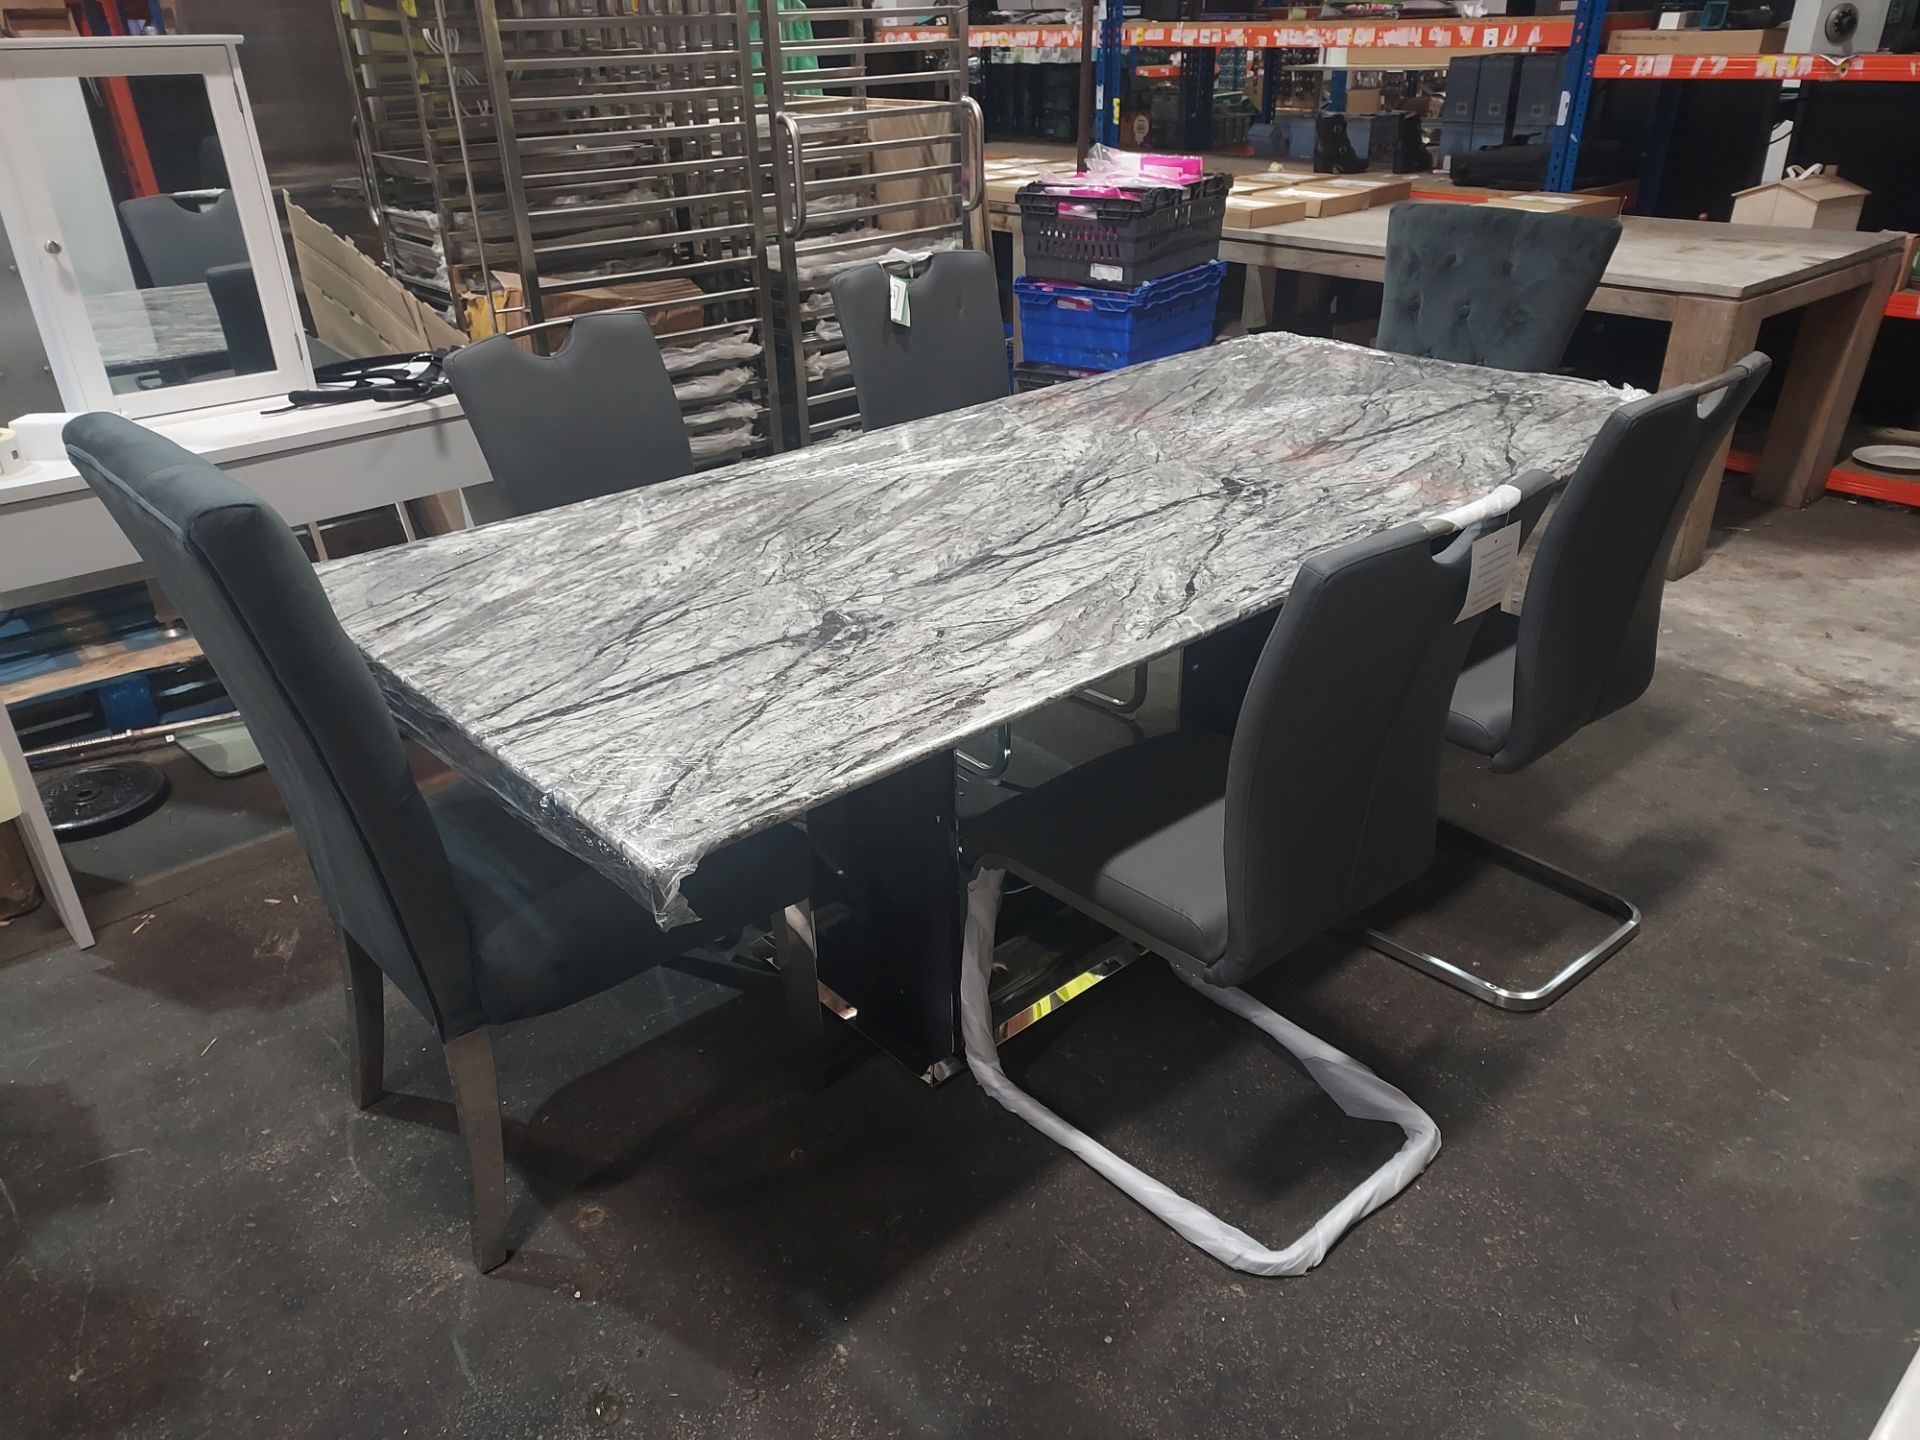 1 X GRANITE TOP DONATELLA DINING TABLE IN MARBLE/GREY HIGH GLOSS (SIZE 2200 X 1000mm) WITH 6 X